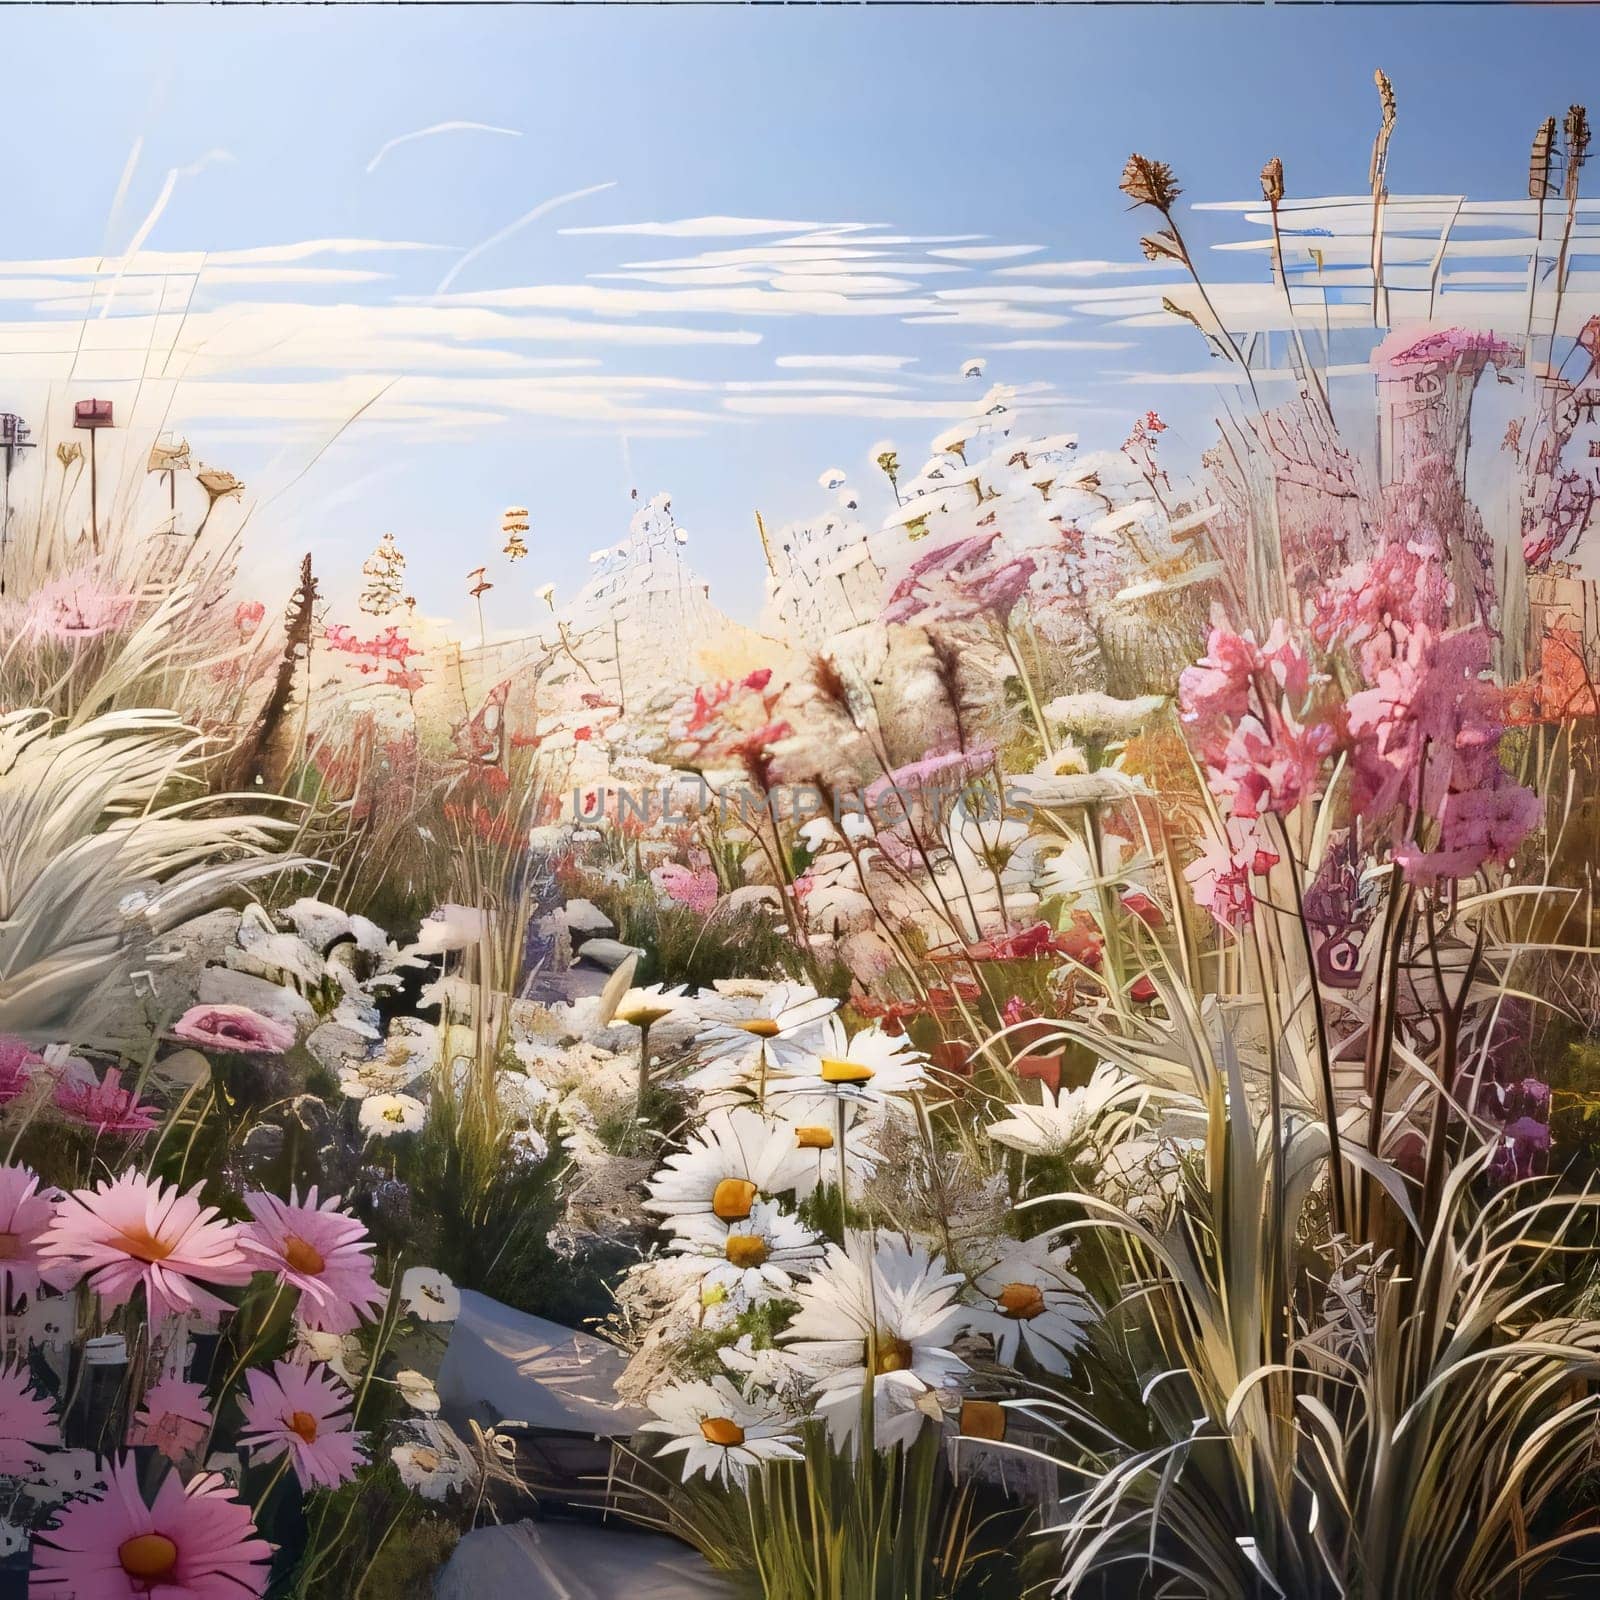 Illustration, view of white daisies and pink flowers in a clearing, day. Flowering flowers, a symbol of spring, new life. by ThemesS